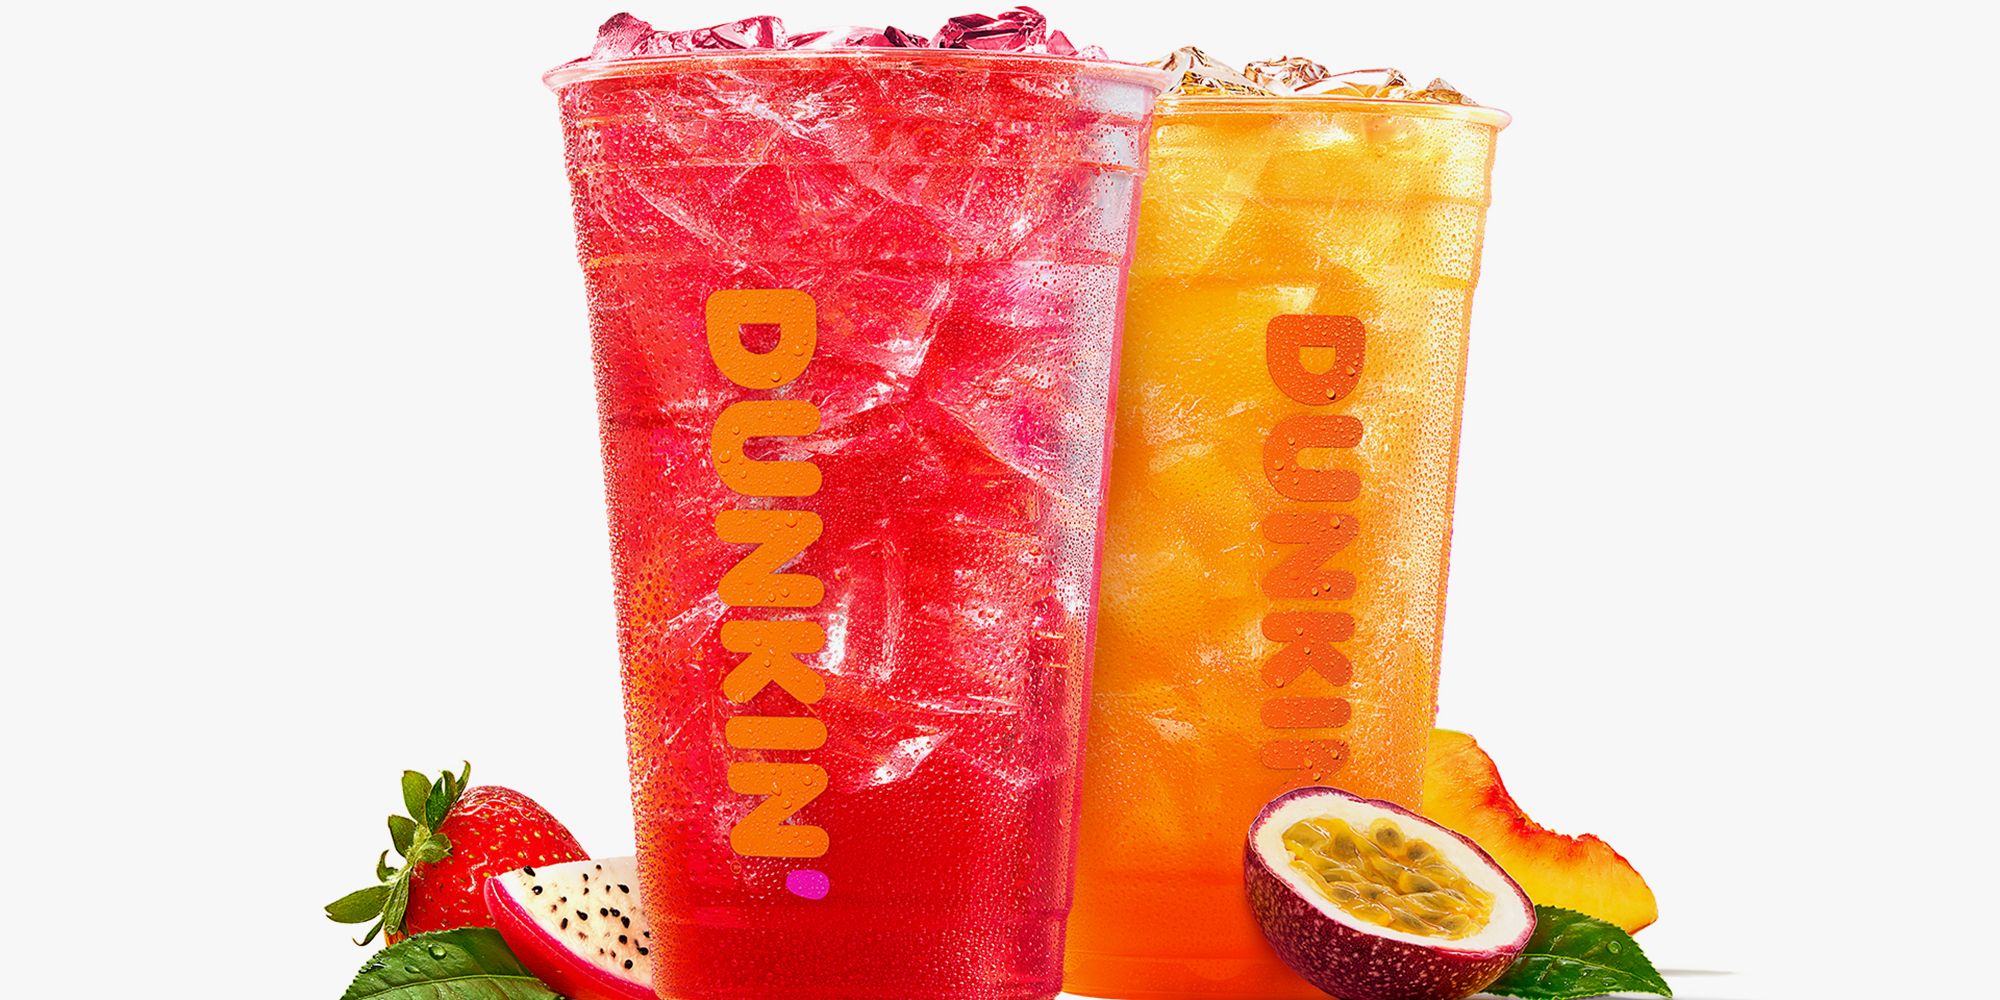 How to Make Dunkin Refreshers at Home